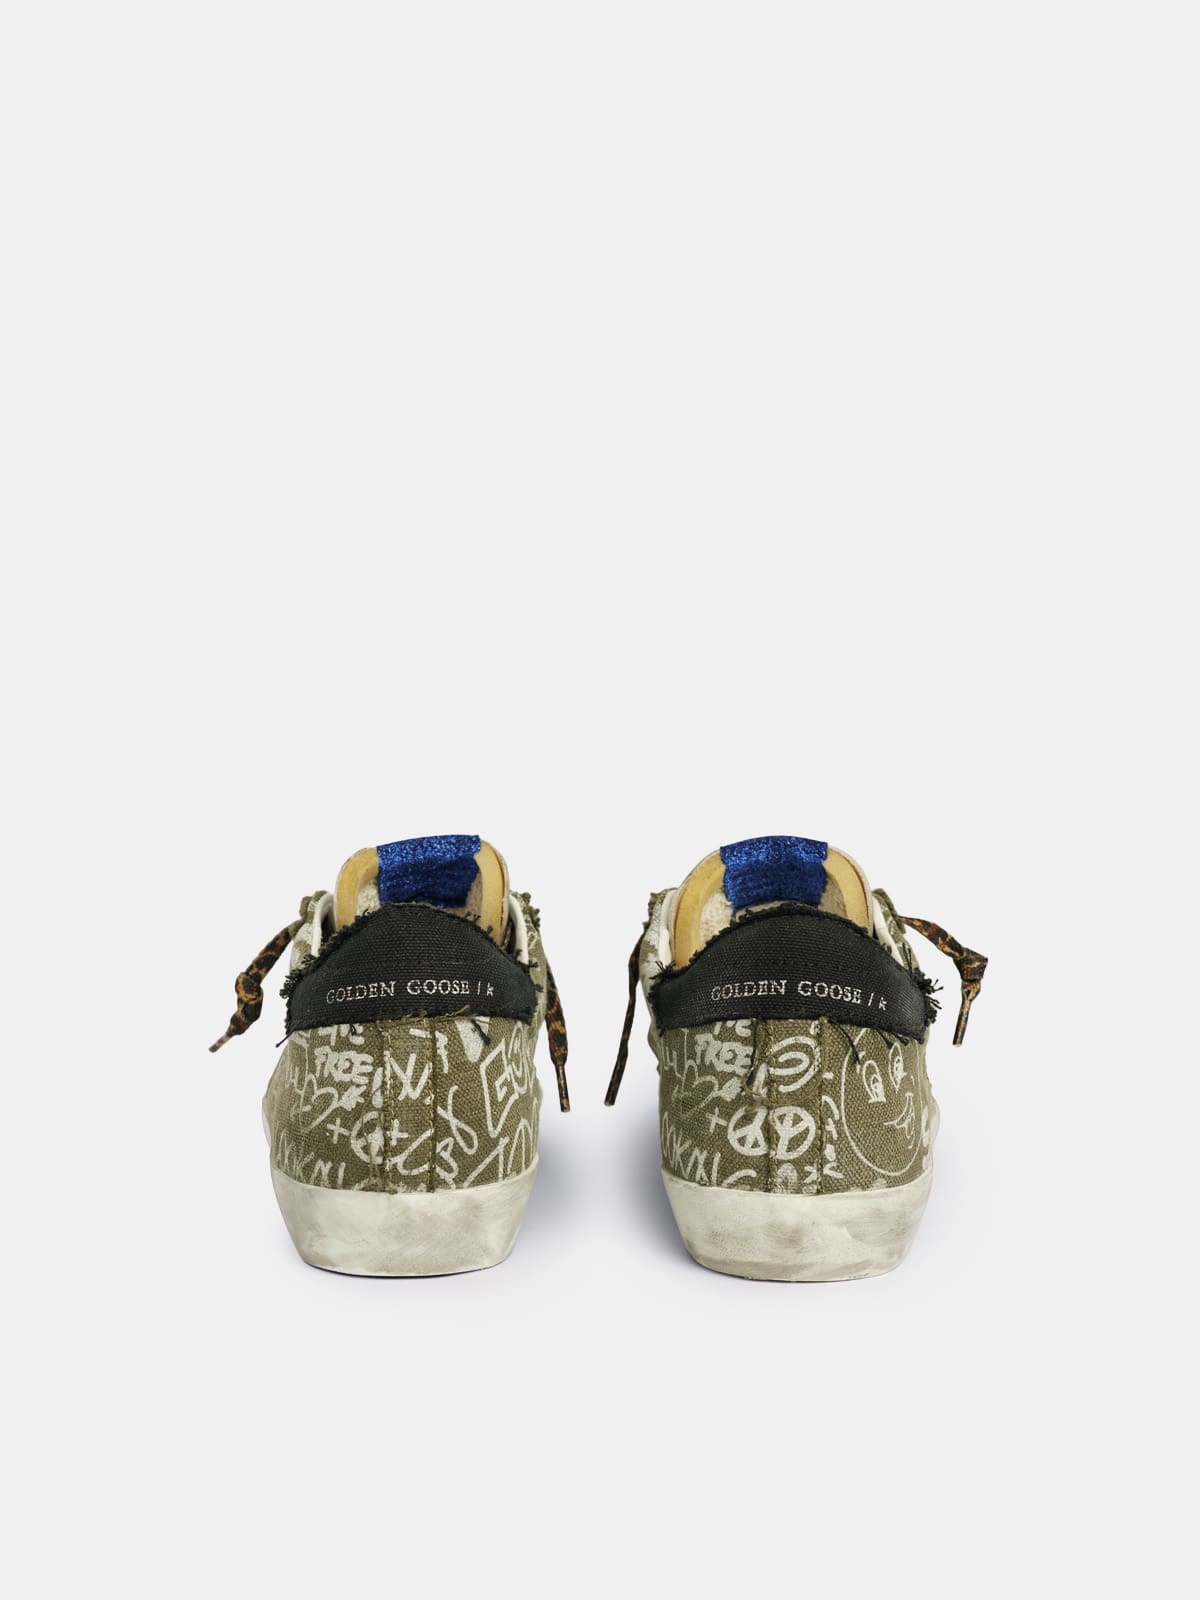 Golden Goose - Super-Star sneakers in green cotton with contrasting white decorations in 